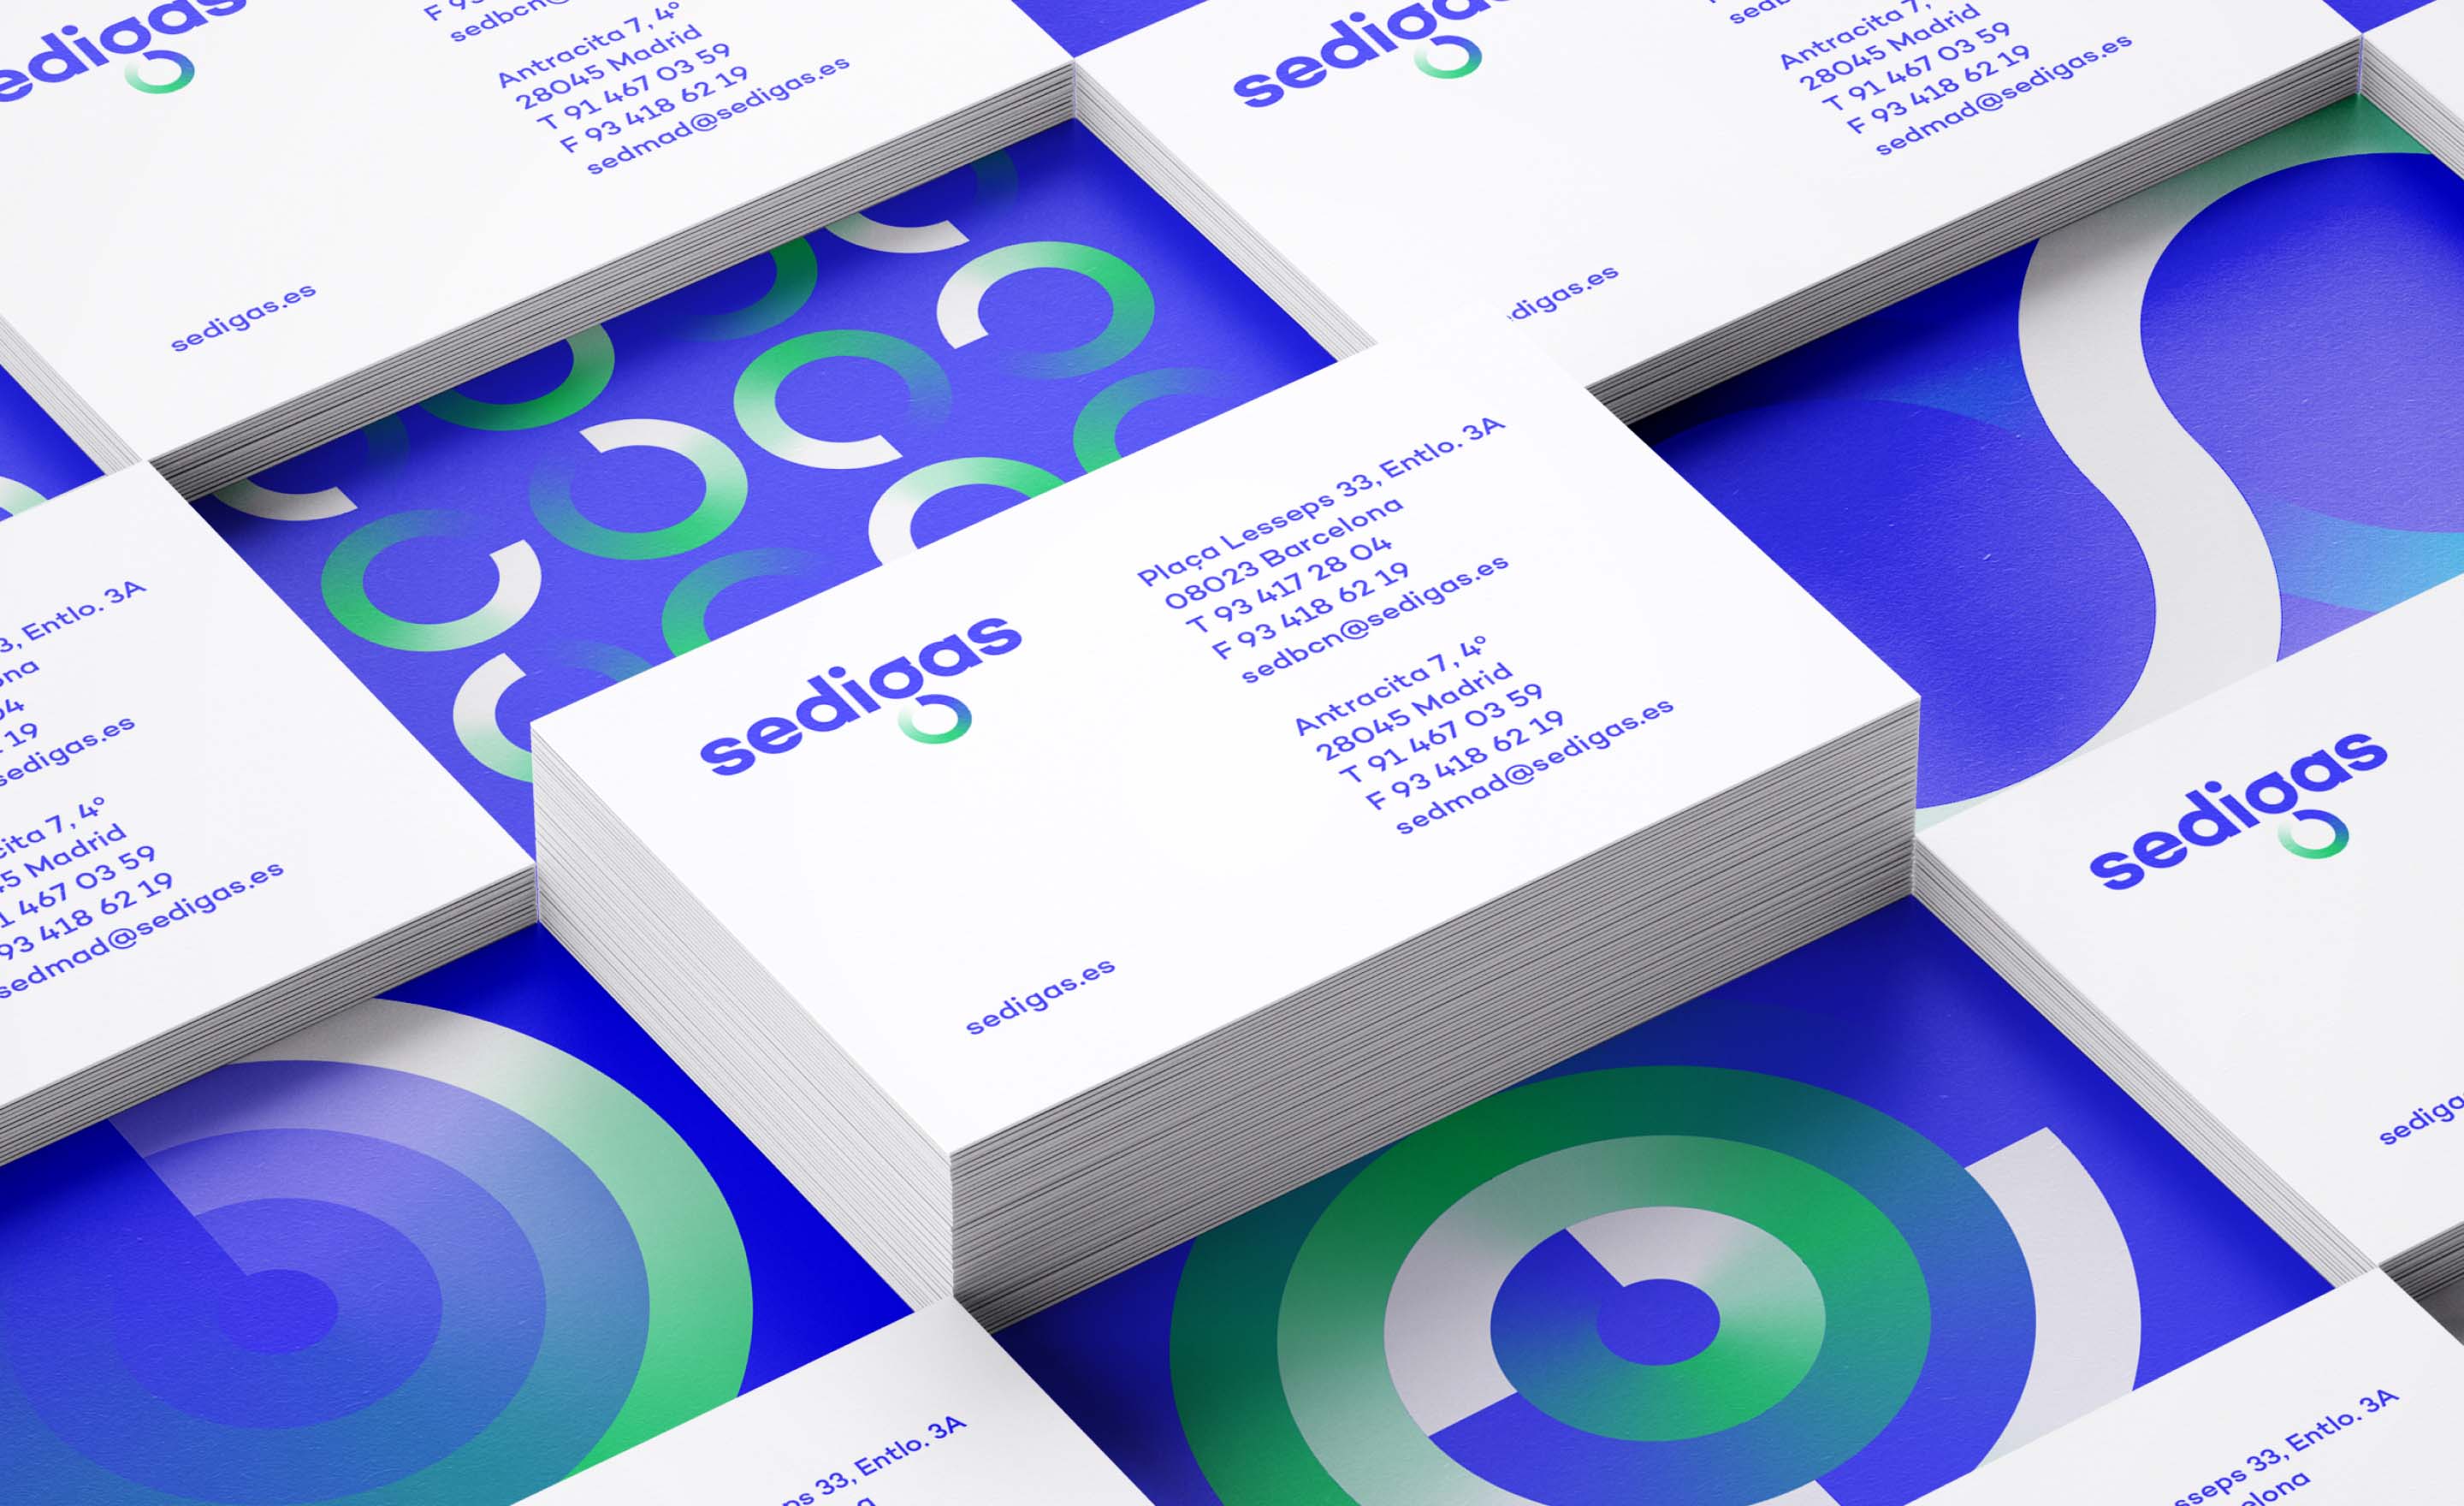 Sedigas was born to bring together the companies of the gas sector in Spain and to play an active role in the fight against climate change, proposing an energy transition based on its holistic knowledge of energy.
